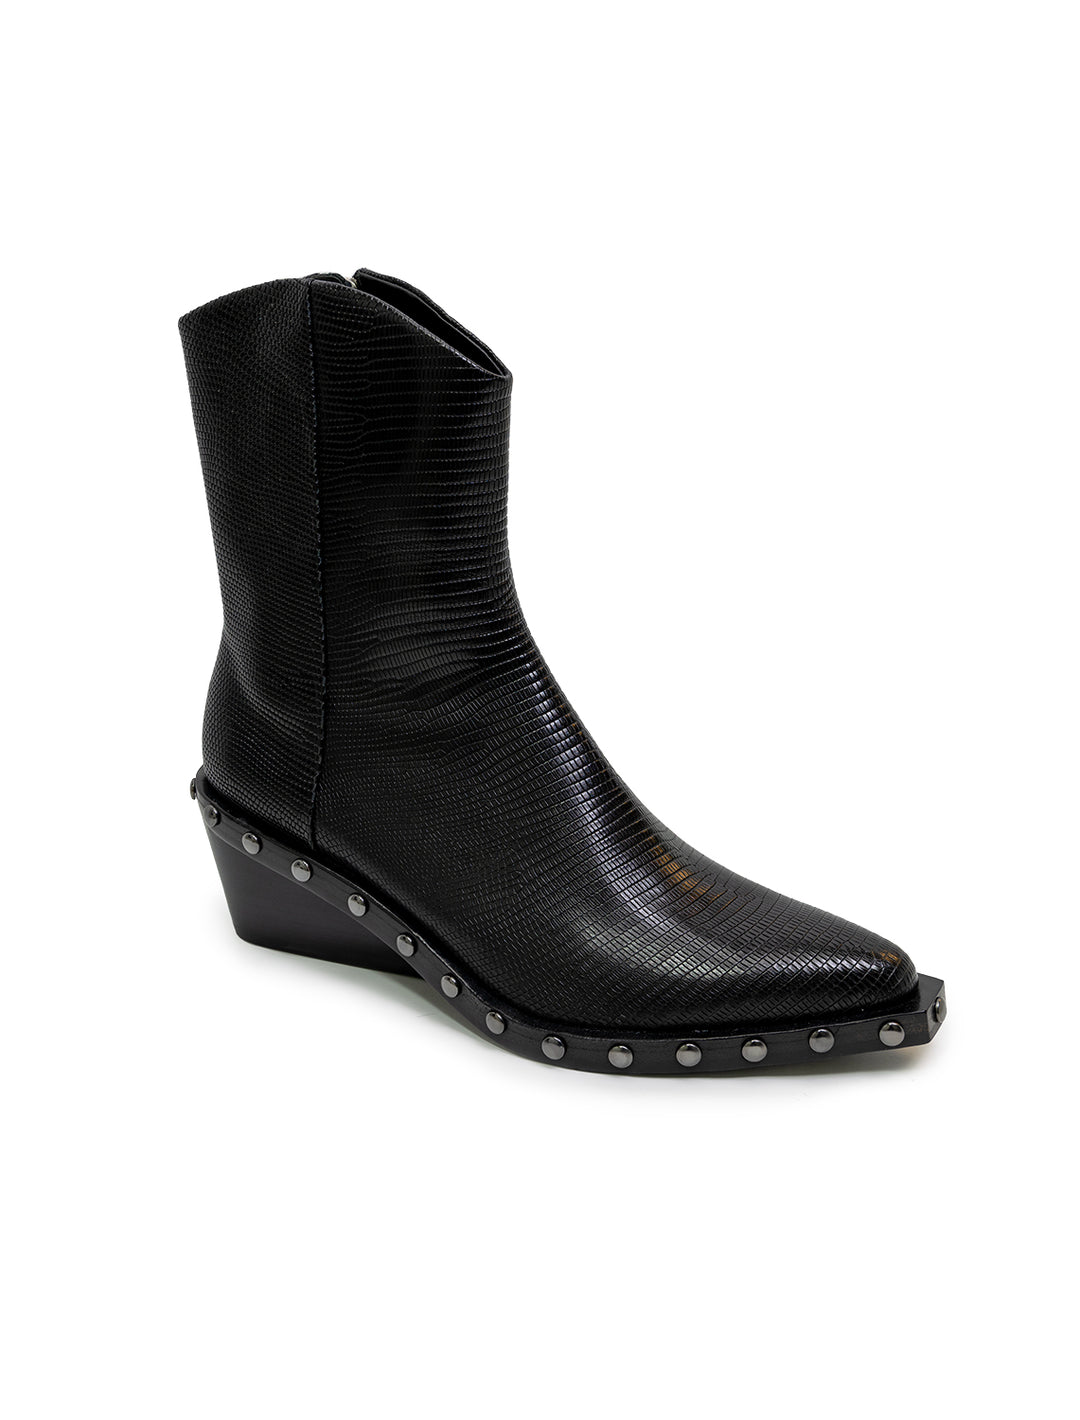 Front angle view of Rag & Bone's santiago boots in black.